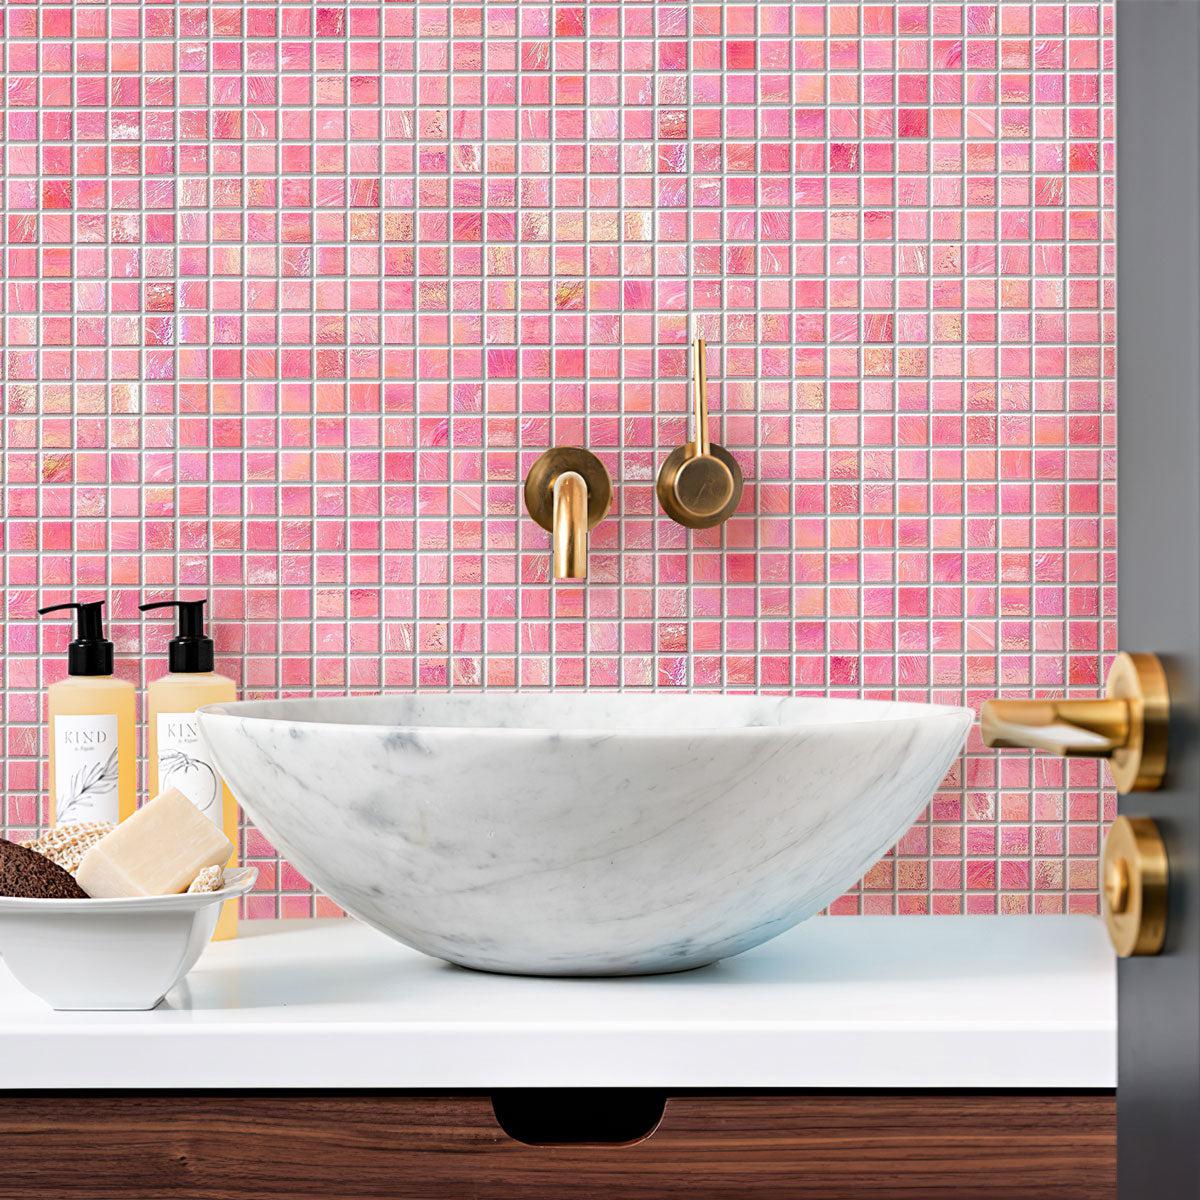 Gorgeous Pearly Swirled Pink Squares Glass Pool Tile elegant bathroom oasis.